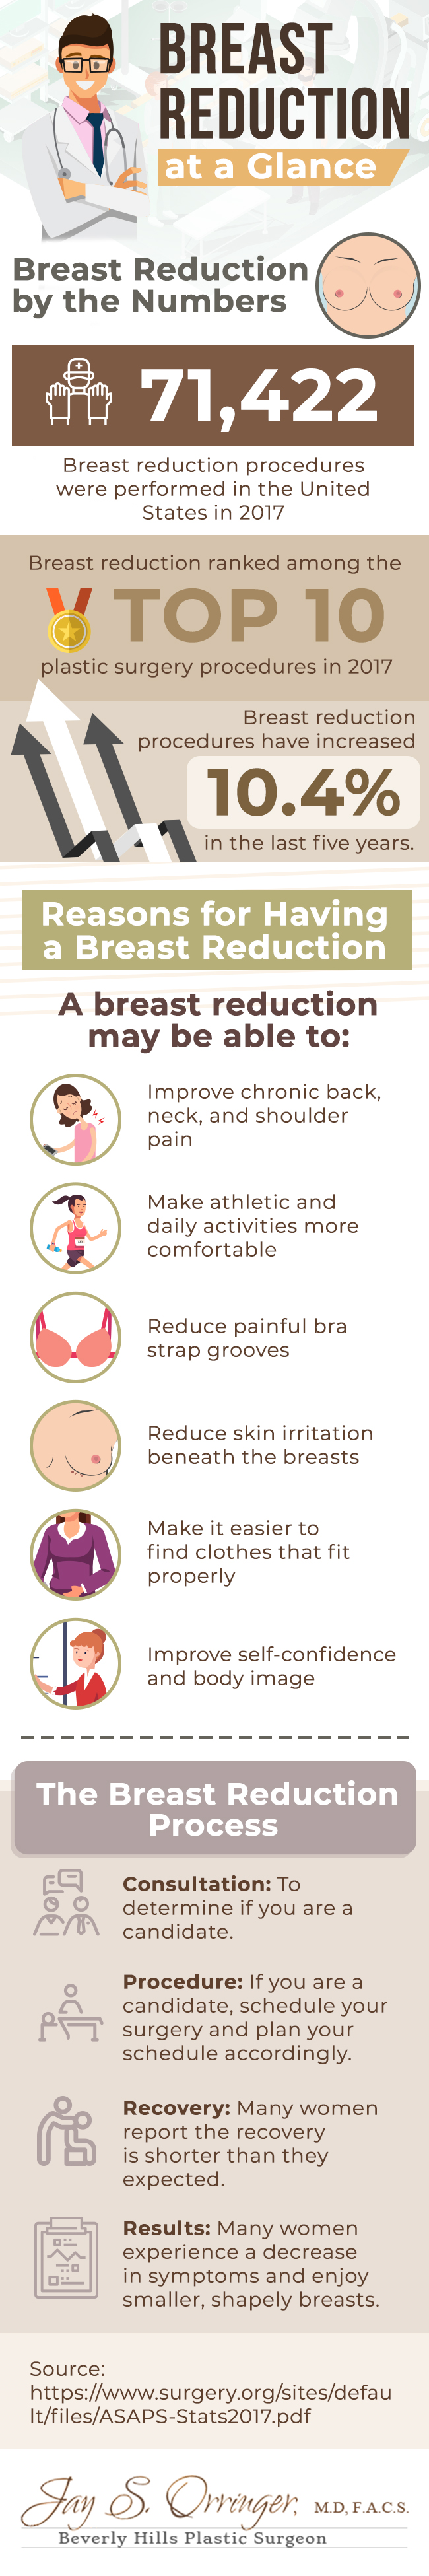 Breast reduction infographic